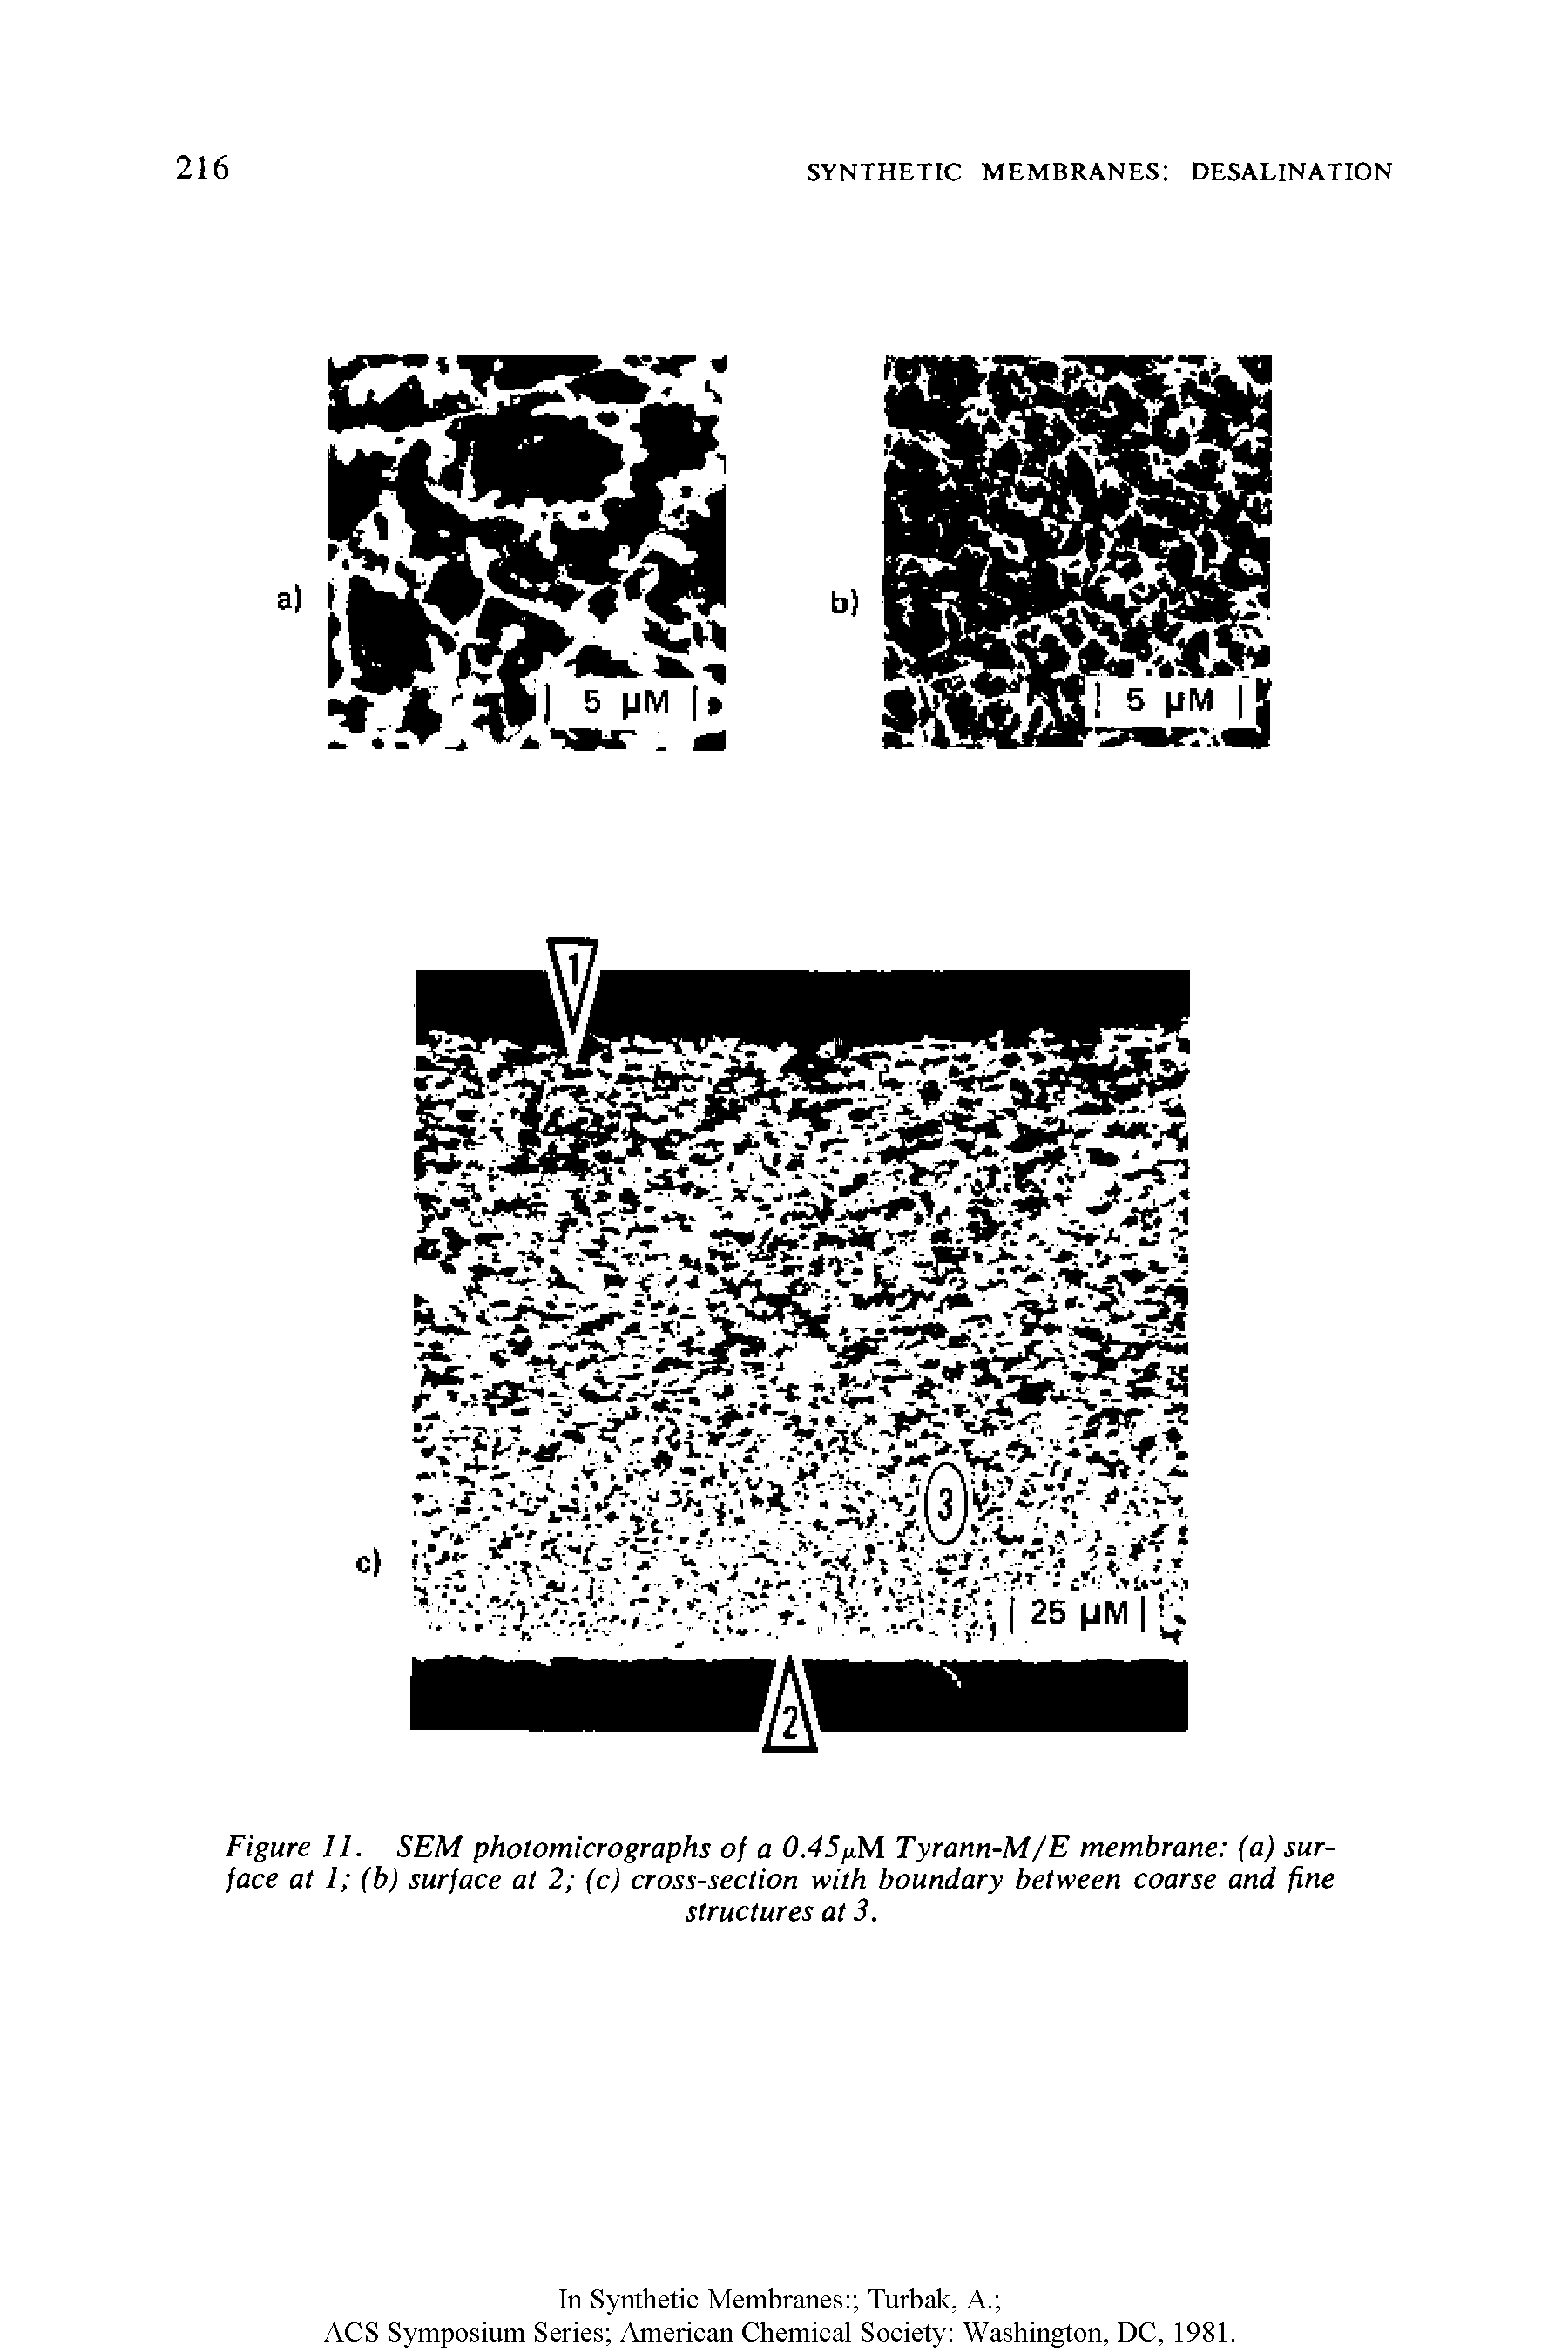 Figure 11. SEM photomicrographs of a 0.45fM Tyrann-M/E membrane (a) surface at 1 (b) surface at 2 (c) cross-section with boundary between coarse and fine...